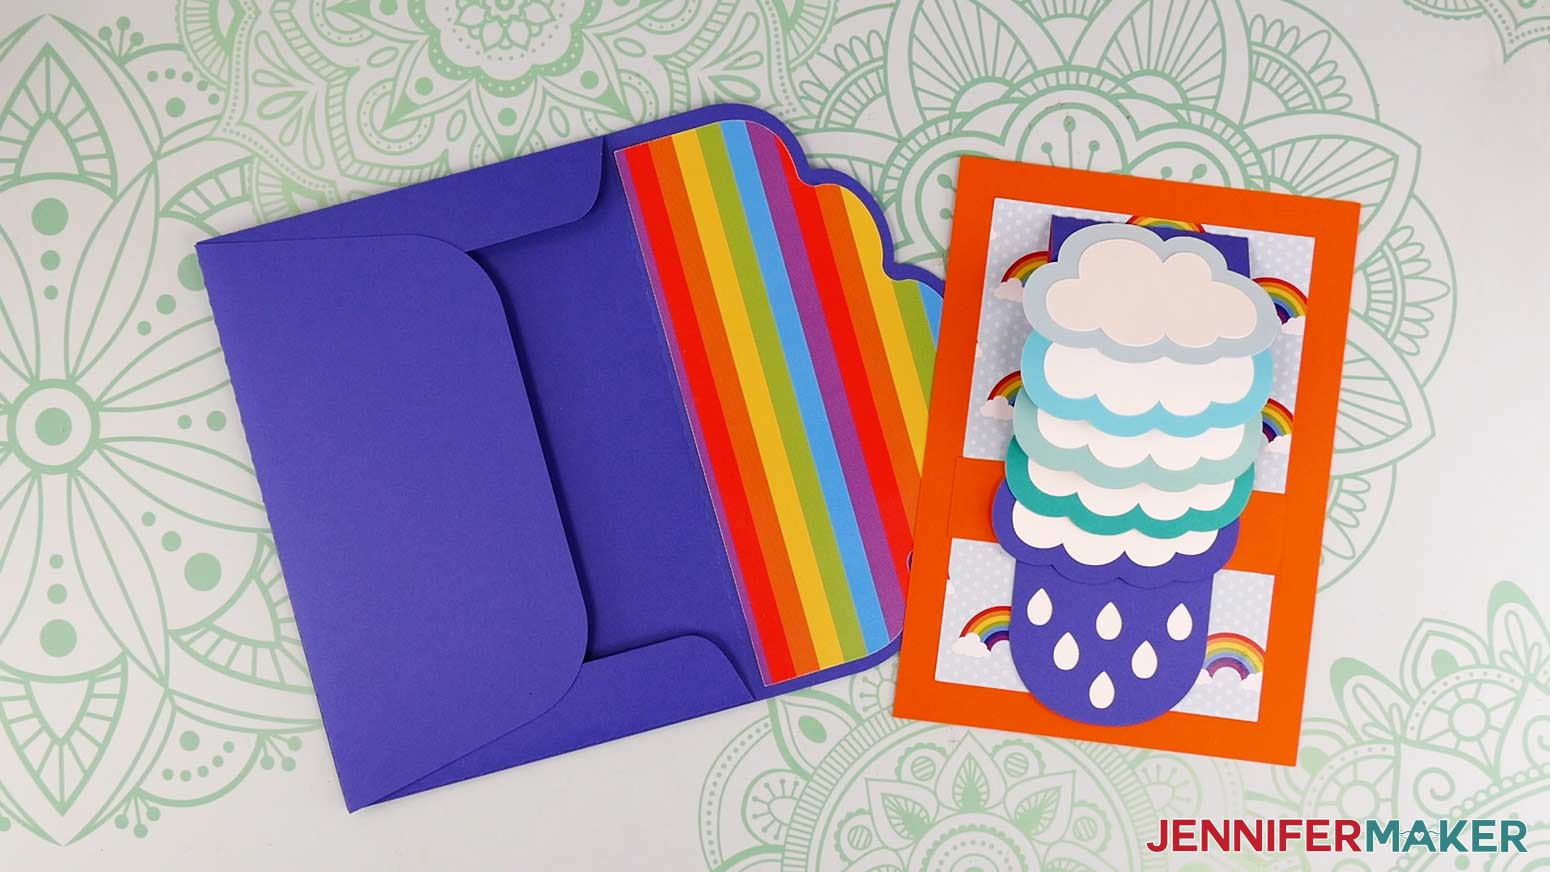 The assembled rainbow waterfall card and matching A7 envelope